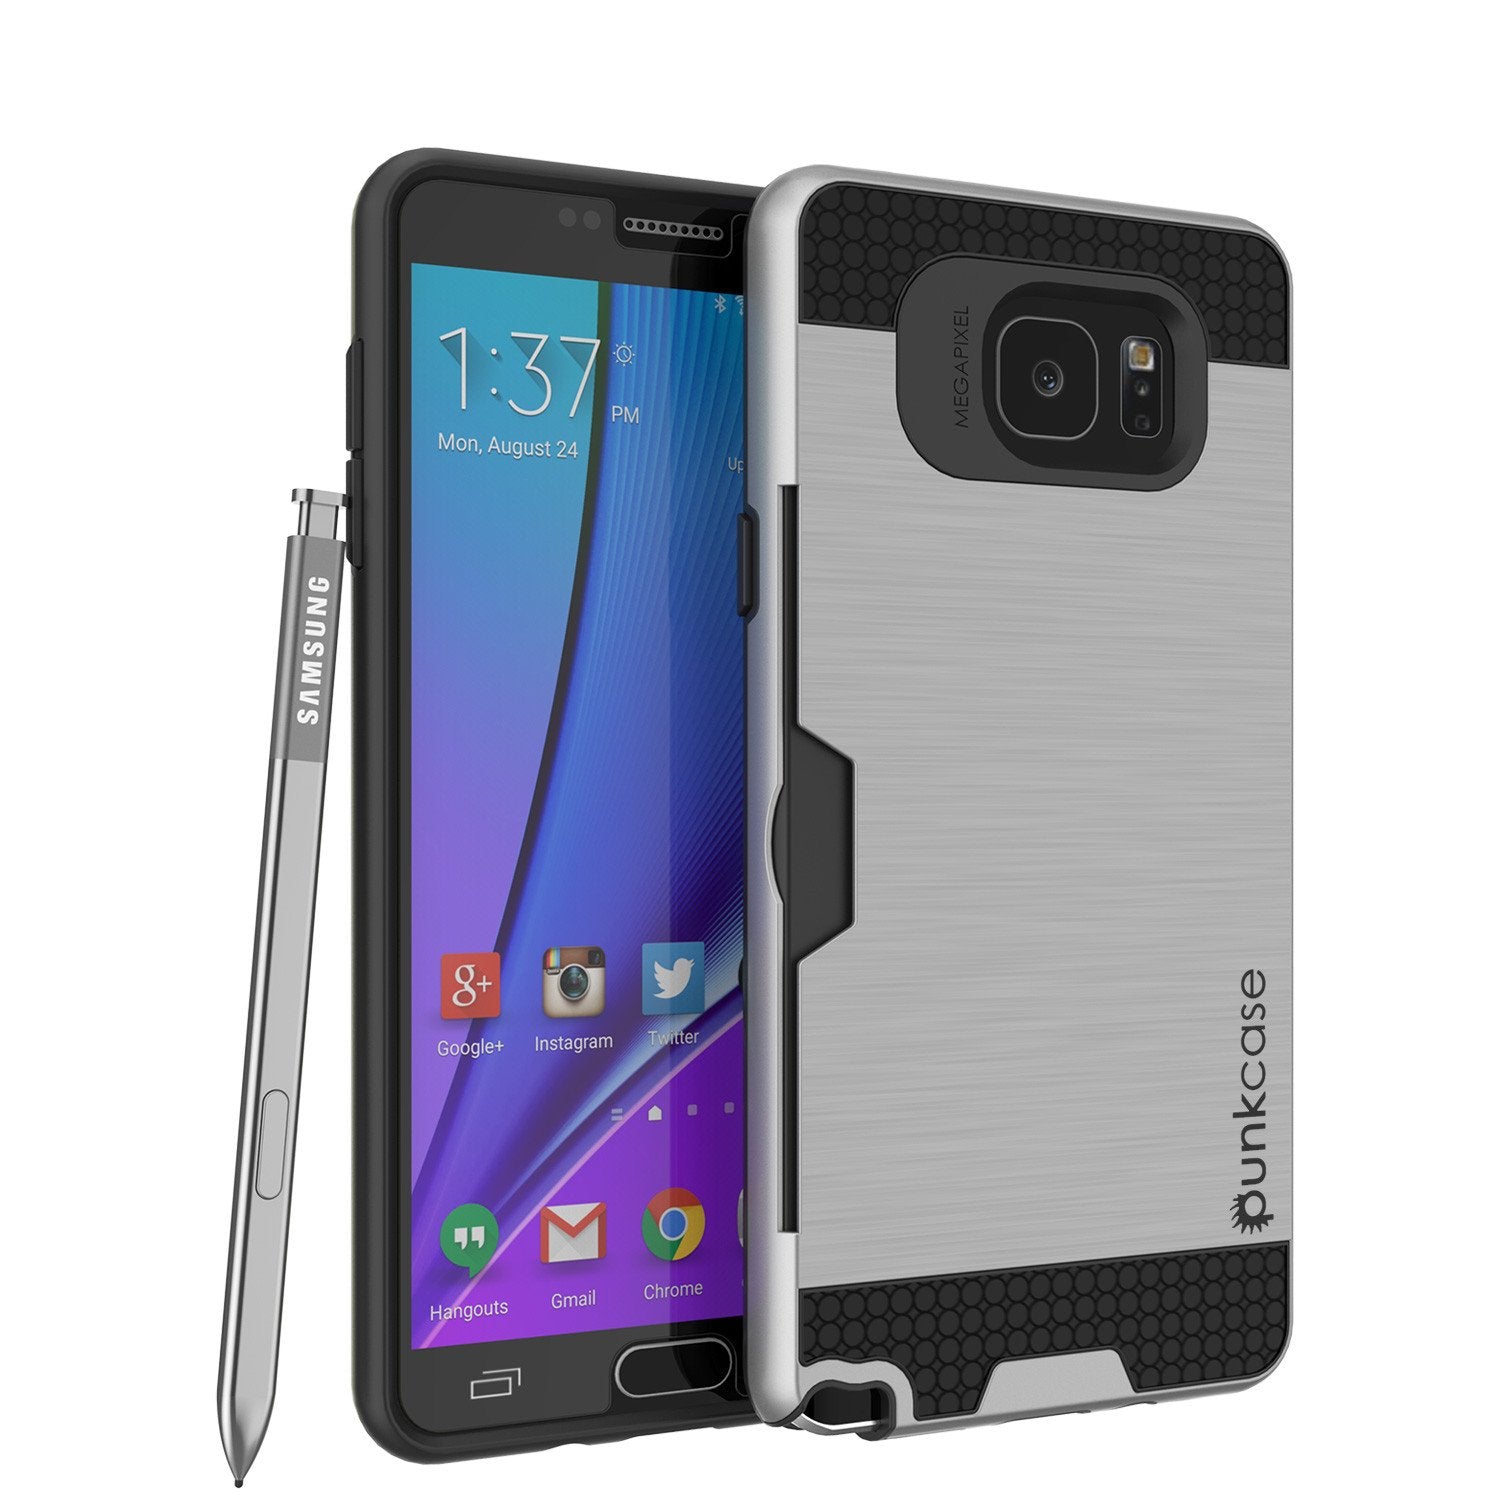 Galaxy Note 5 Case PunkCase SLOT Silver Series Slim Armor Soft Cover Case w/ Tempered Glass